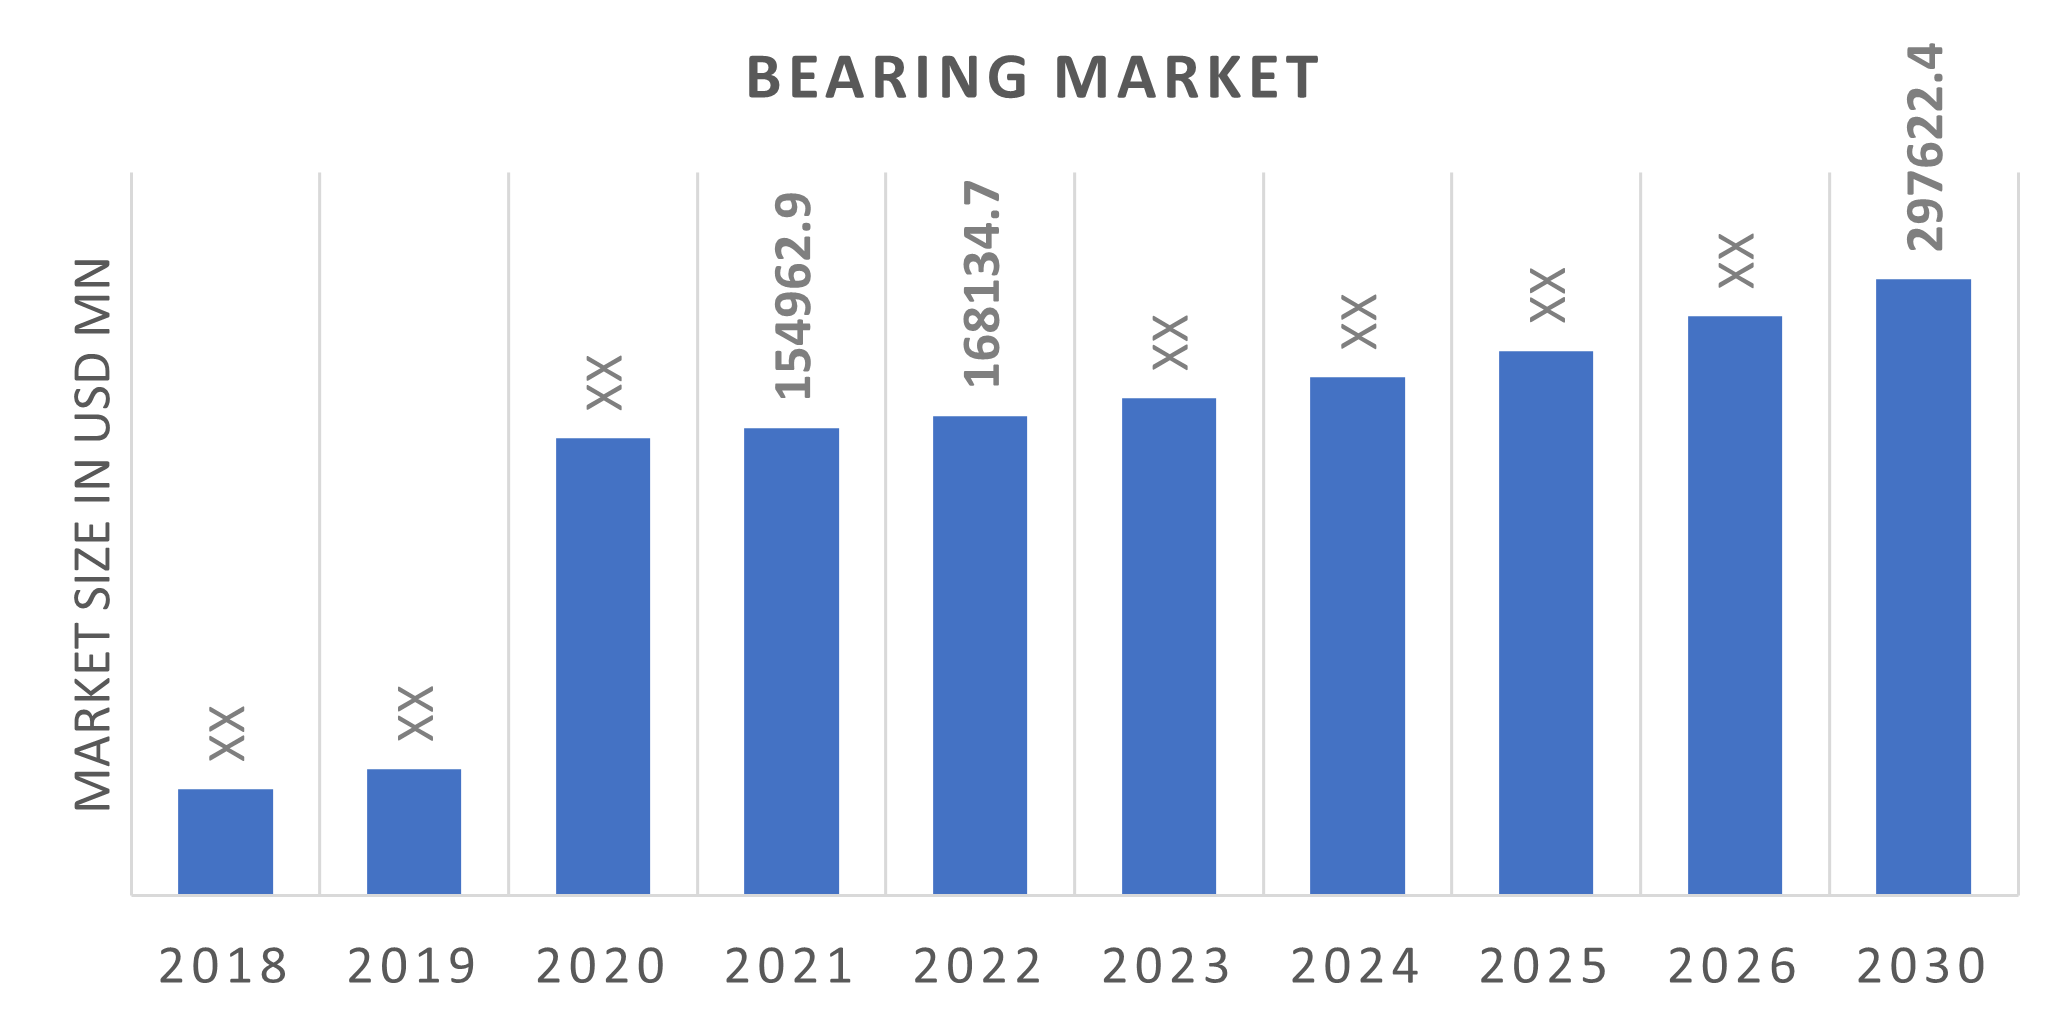 Global Bearing Market Overview